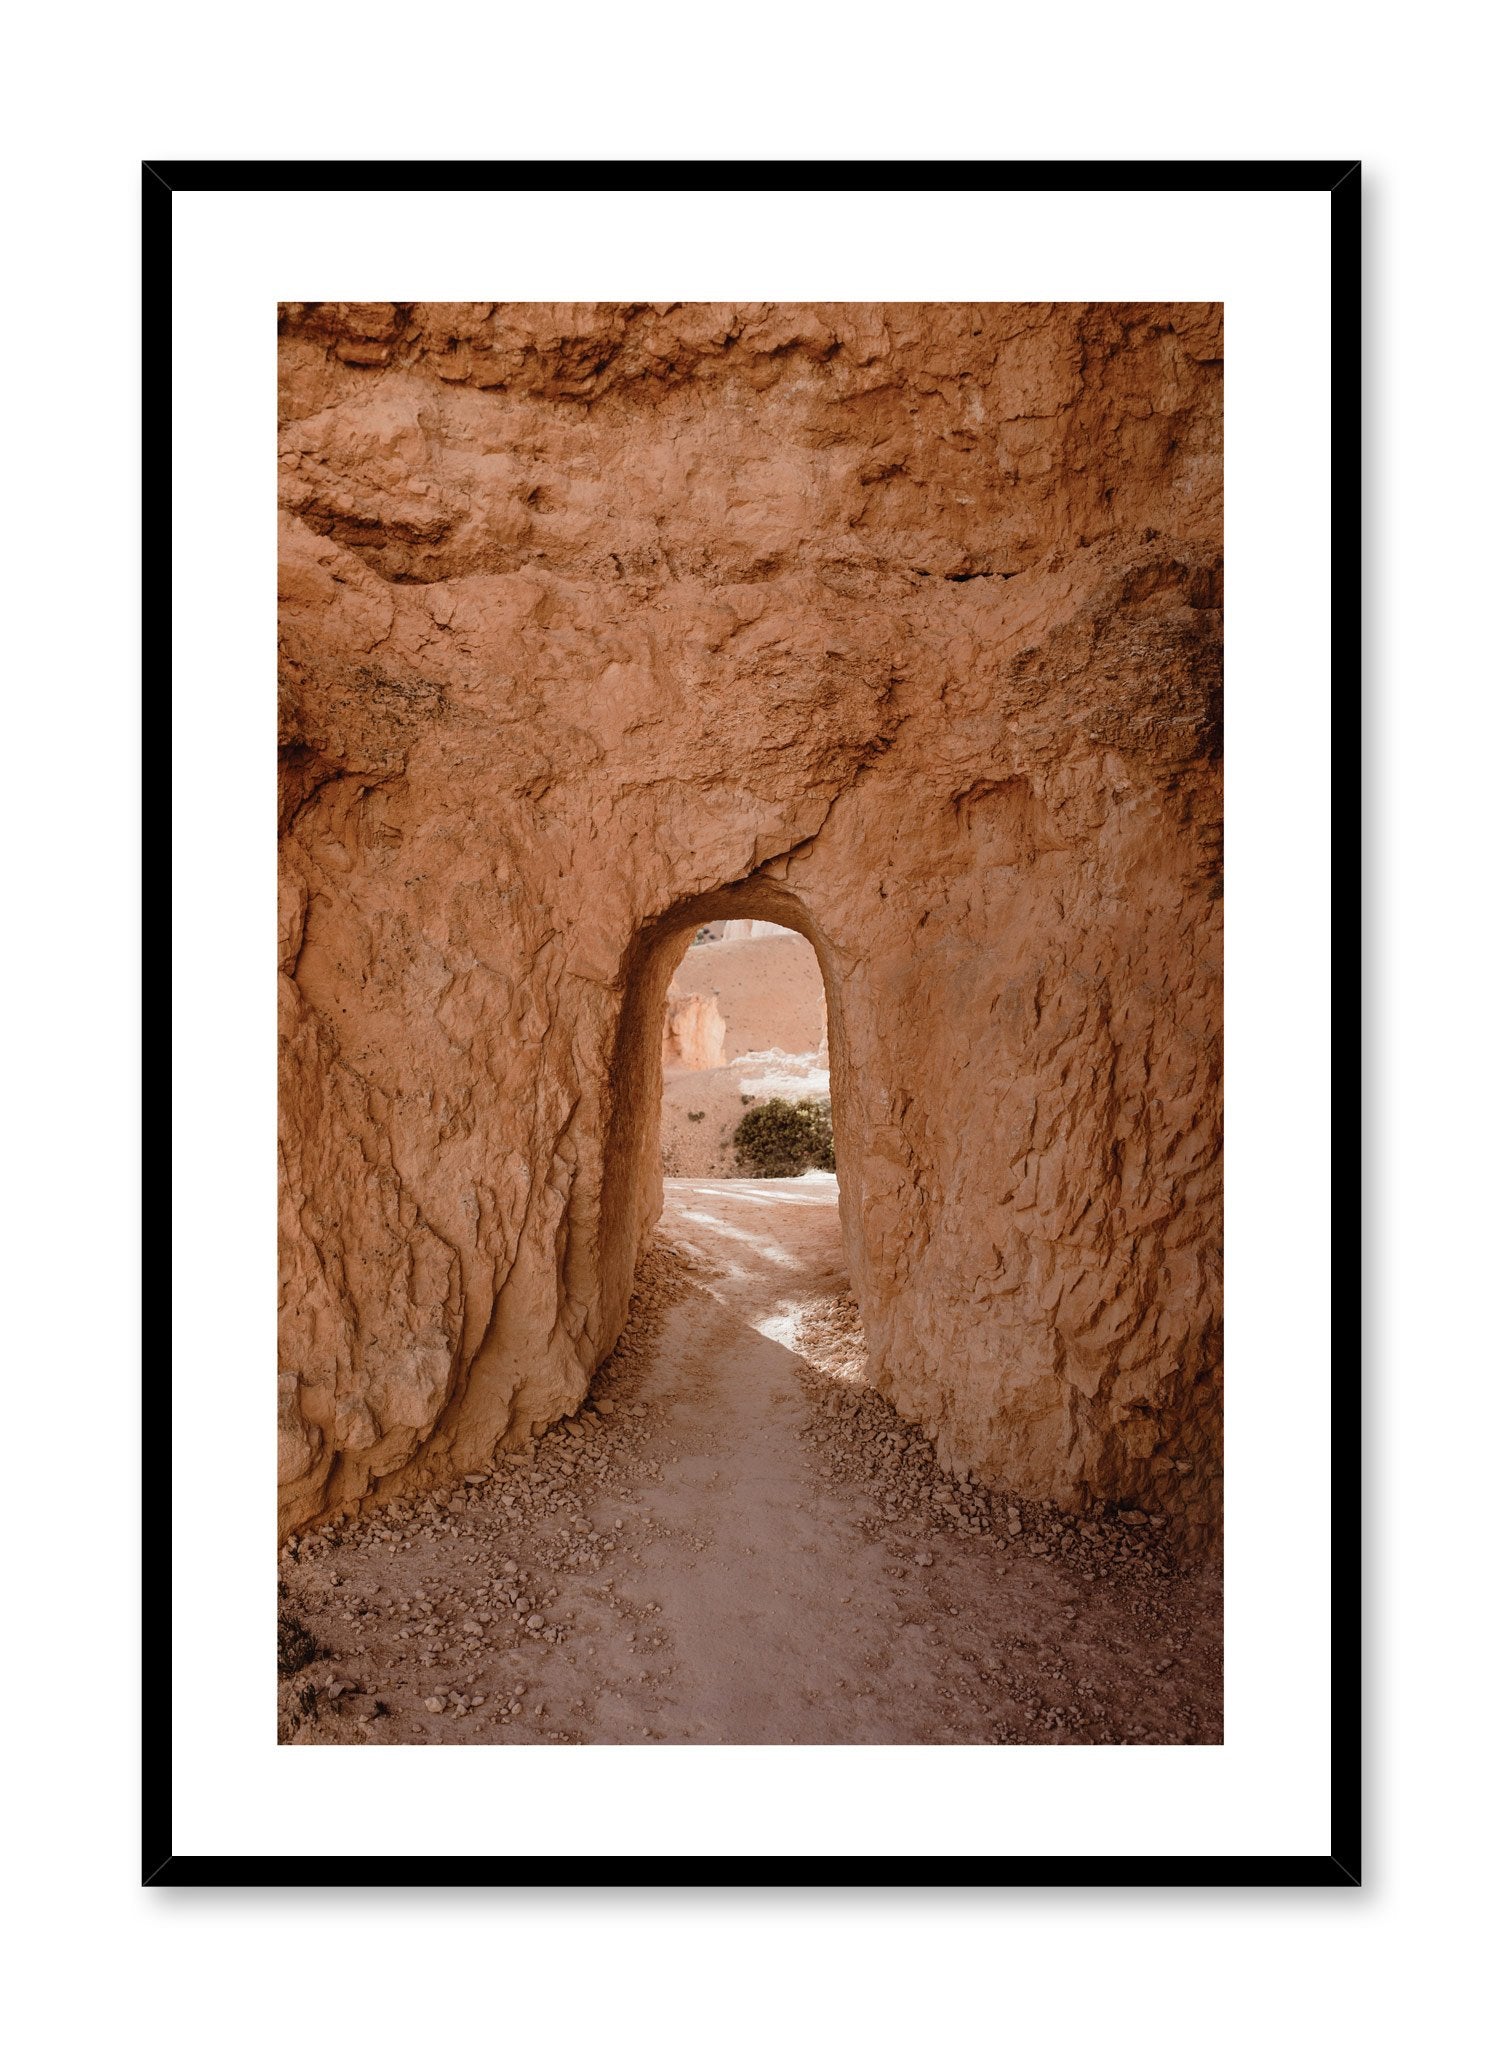 Modern photography poster by Opposite Wall with little doorway carved in stone.